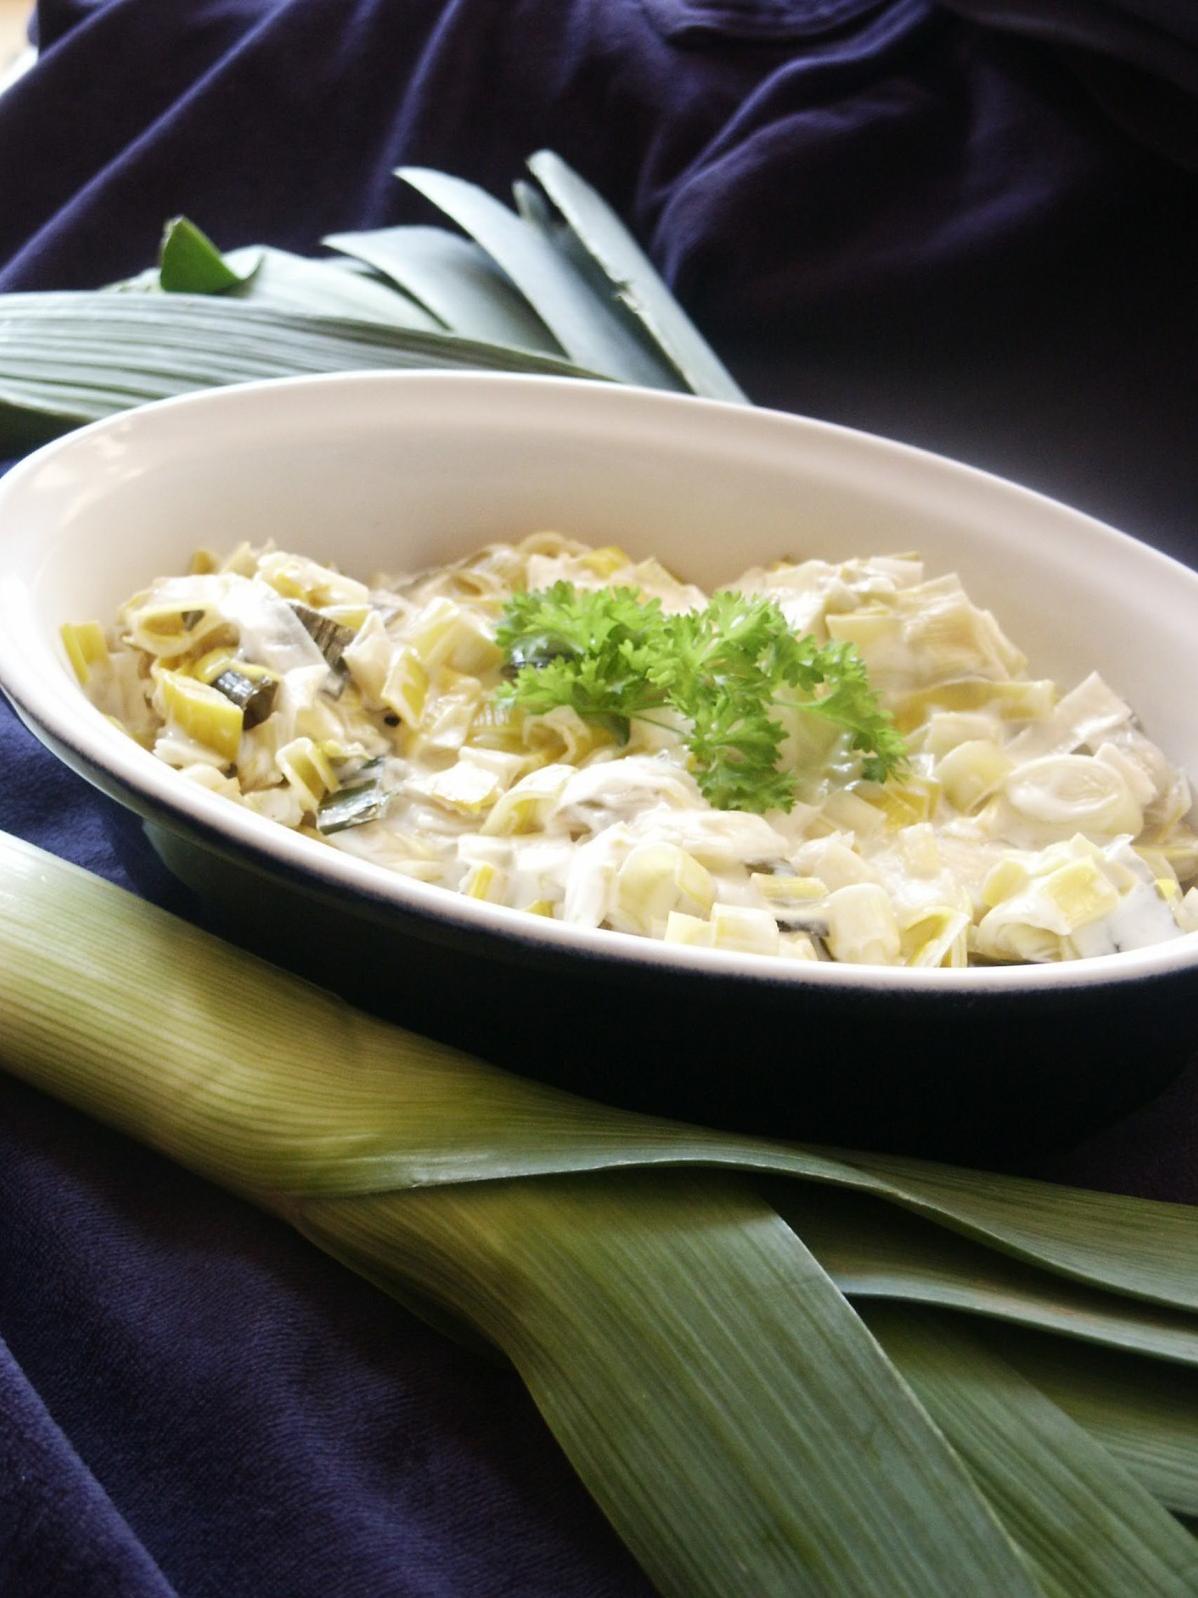  Indulge in the perfect balance of light and creamy sauce with the refreshing taste of leeks.